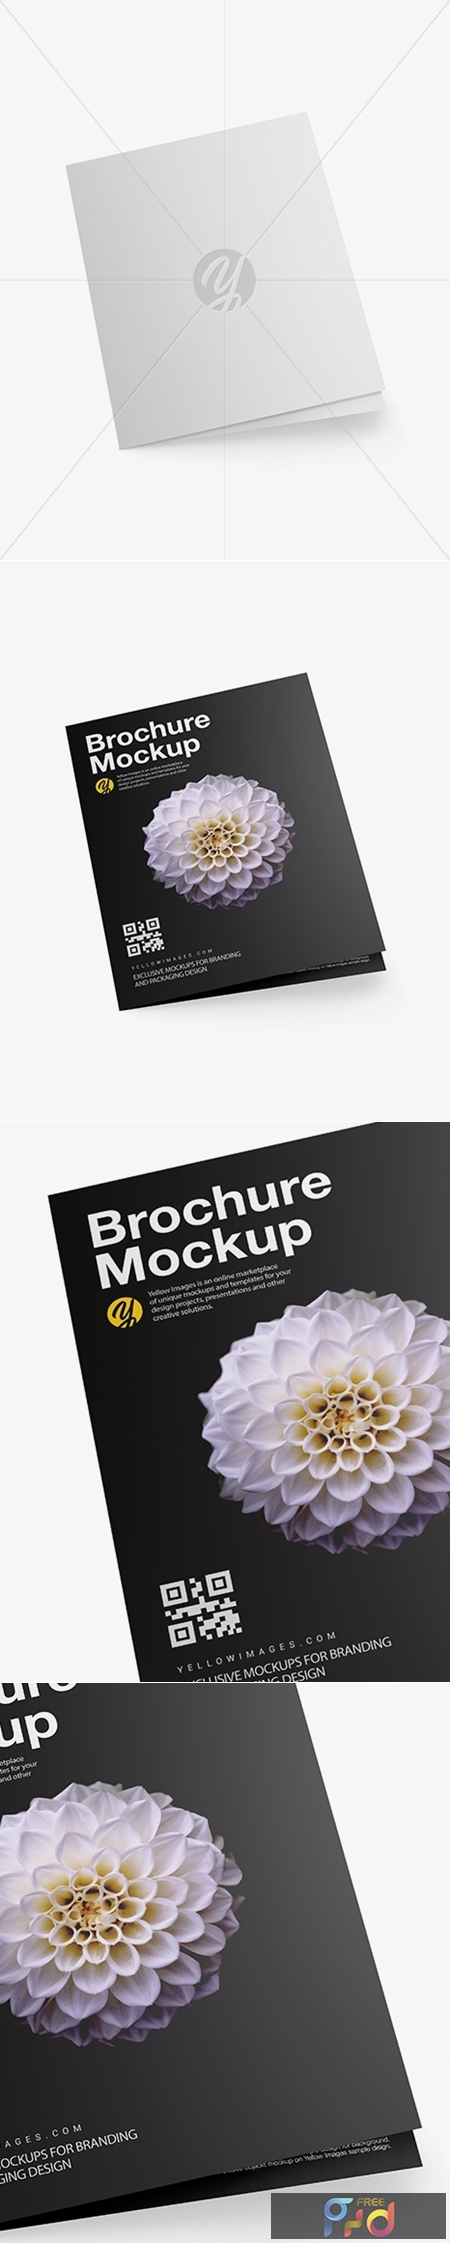 Download A5 Paper Mockup Free Download Free And Premium Packaging Mockup Psd Templates And Design Assets PSD Mockup Templates